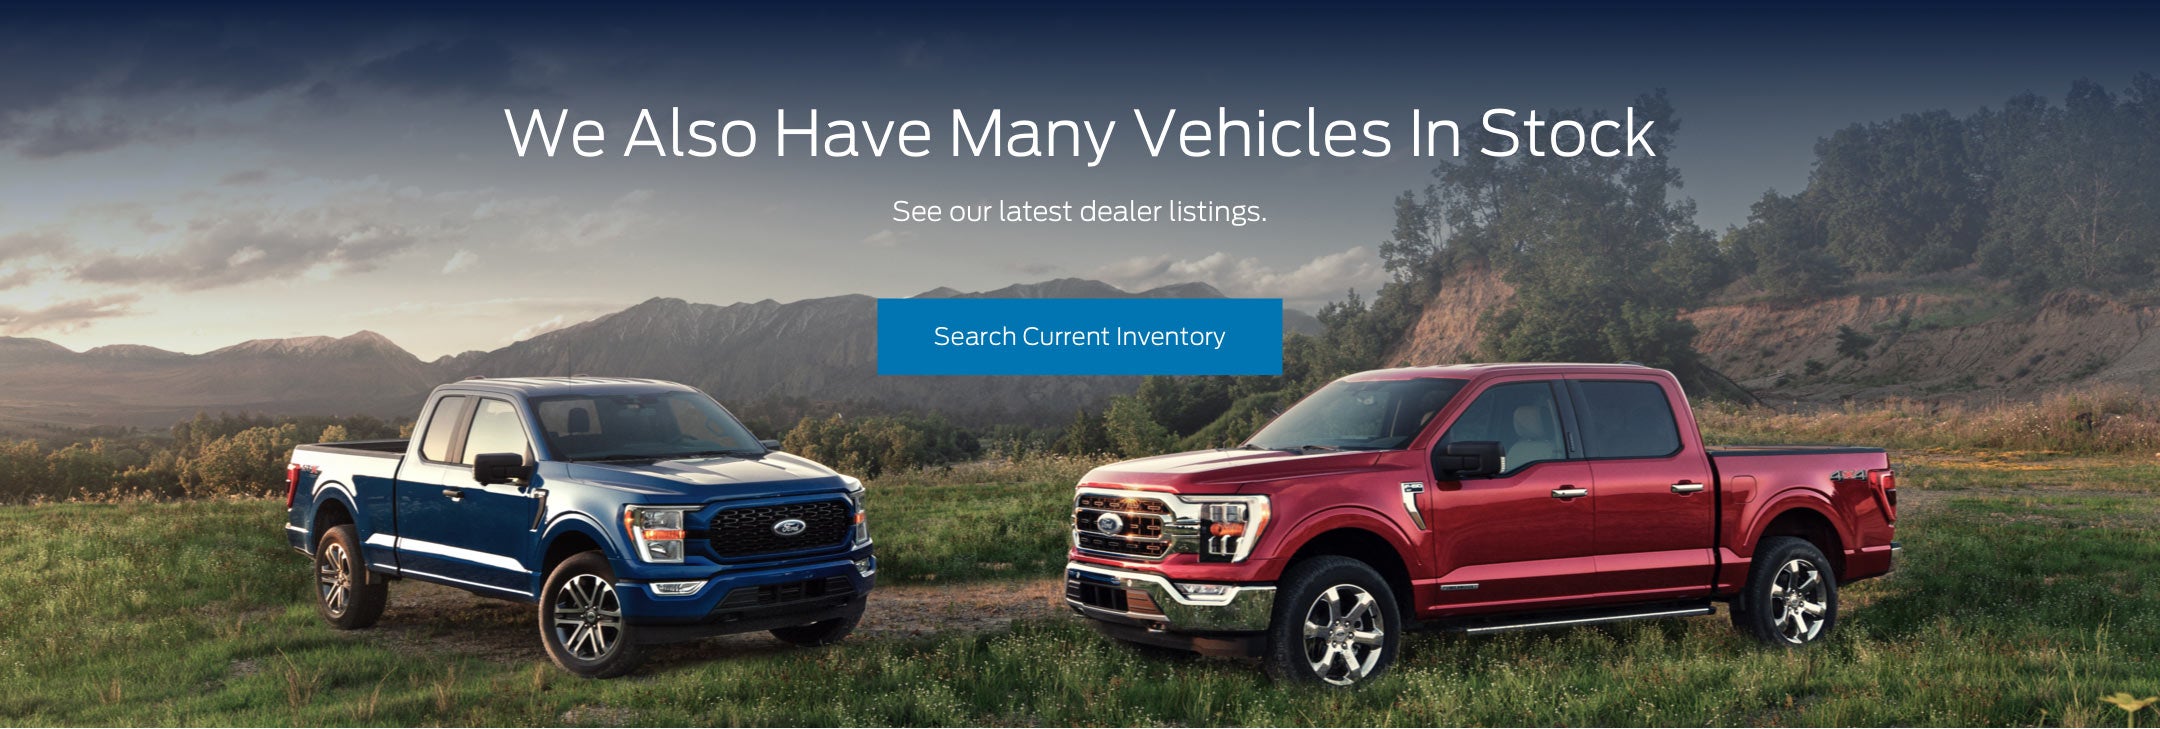 Ford vehicles in stock | Bill McCandless Ford in Mercer PA